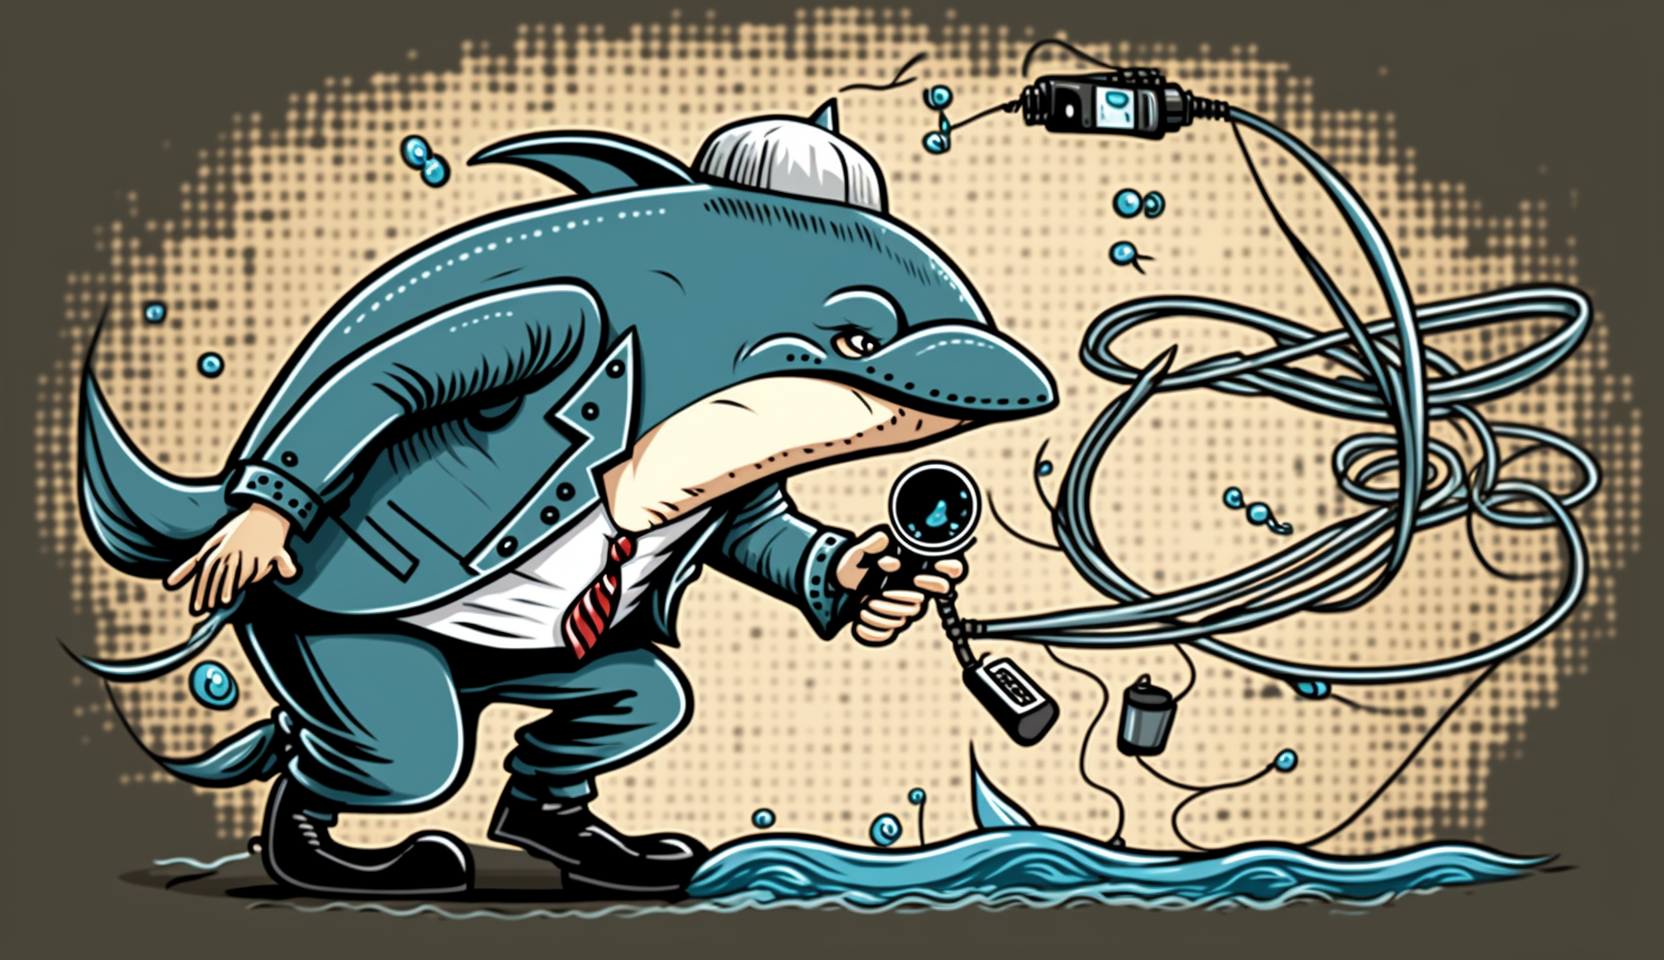 A cartoon illustration of a detective with a magnifying glass analyzing network cables, while Wireshark logo hovers above them, symbolizing the process of network troubleshooting and analysis using Wireshark.